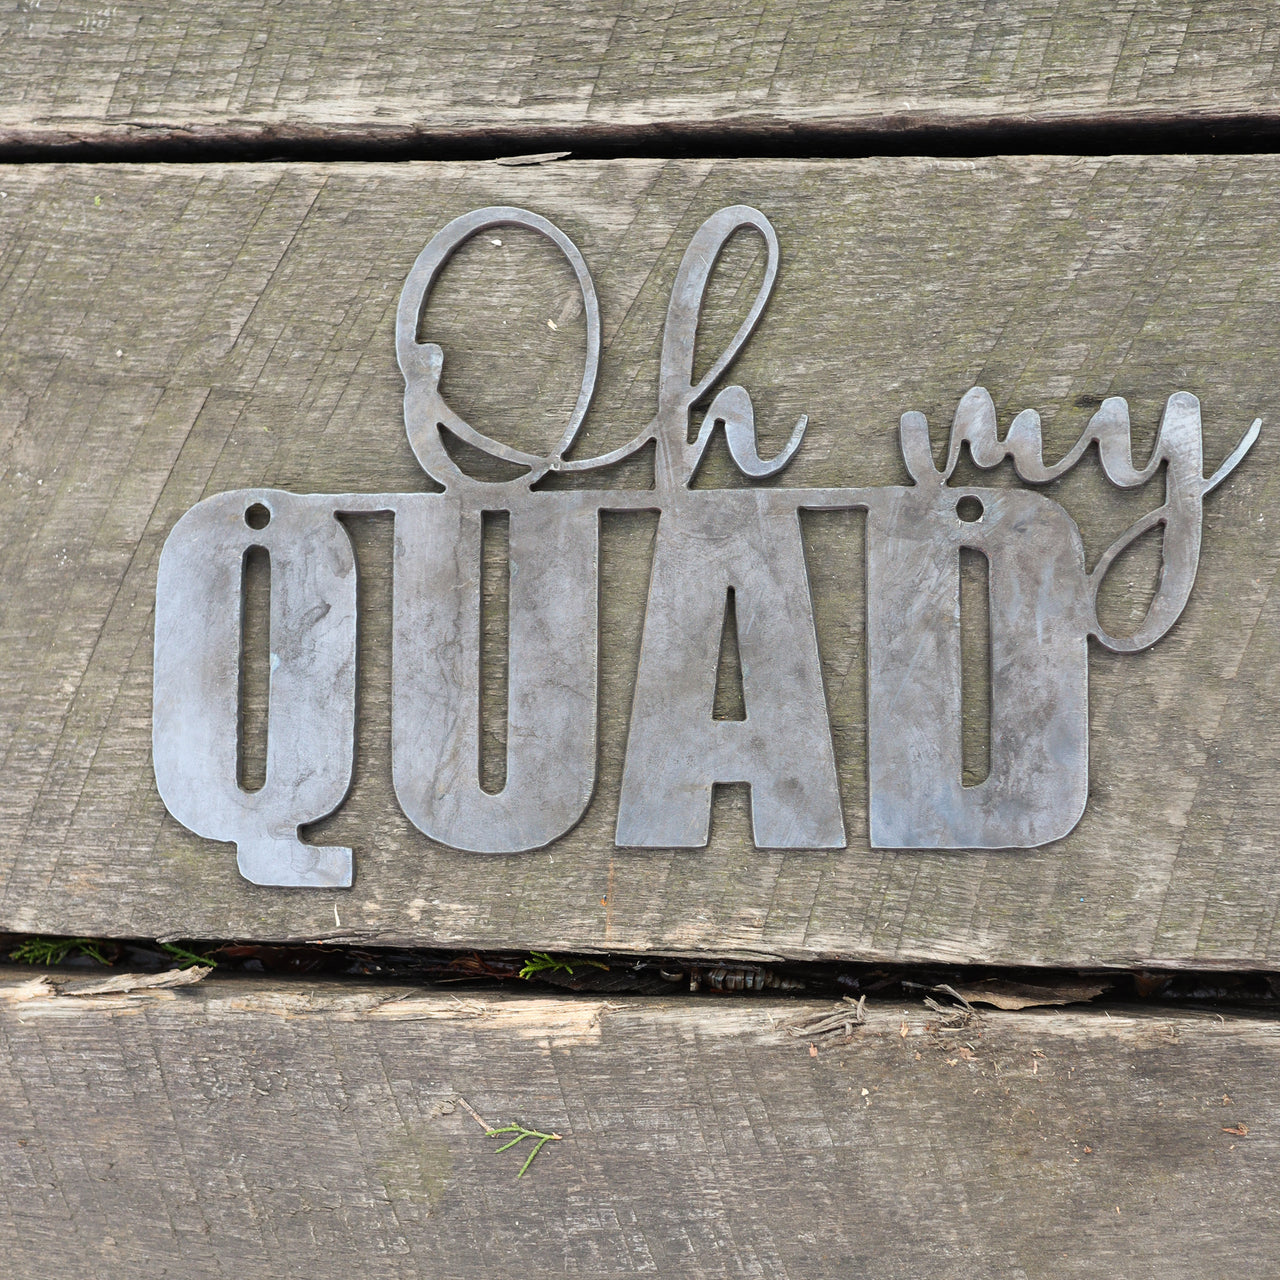 Oh my Quad! Wall Art - Home Gym Decor - Workout Inspiration Metal Sign - Fitness Quote Decor